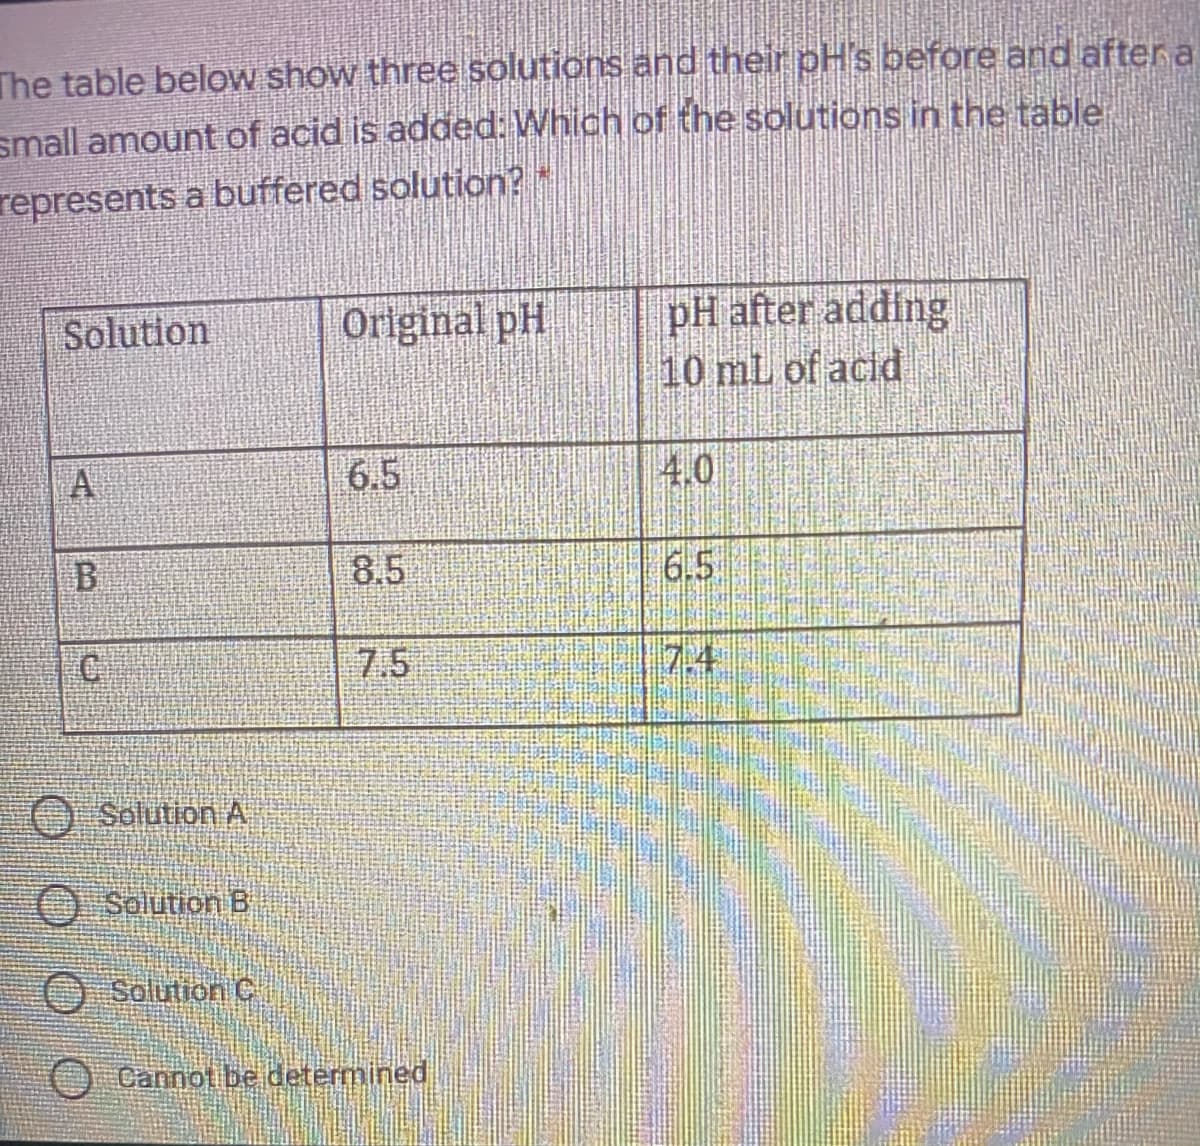 The table below show three solutions and their pHs before and aftera
small amount of acid is added: Which of the solutions in the table
represents a buffered solution?
pH after adding
10 mL of acid
Solution
Original pH
A
6.5
4.0
8.5
6.5
C.
7.5
7.4
OSolution A
O Solution B
O Solution C
Cannot be determined
